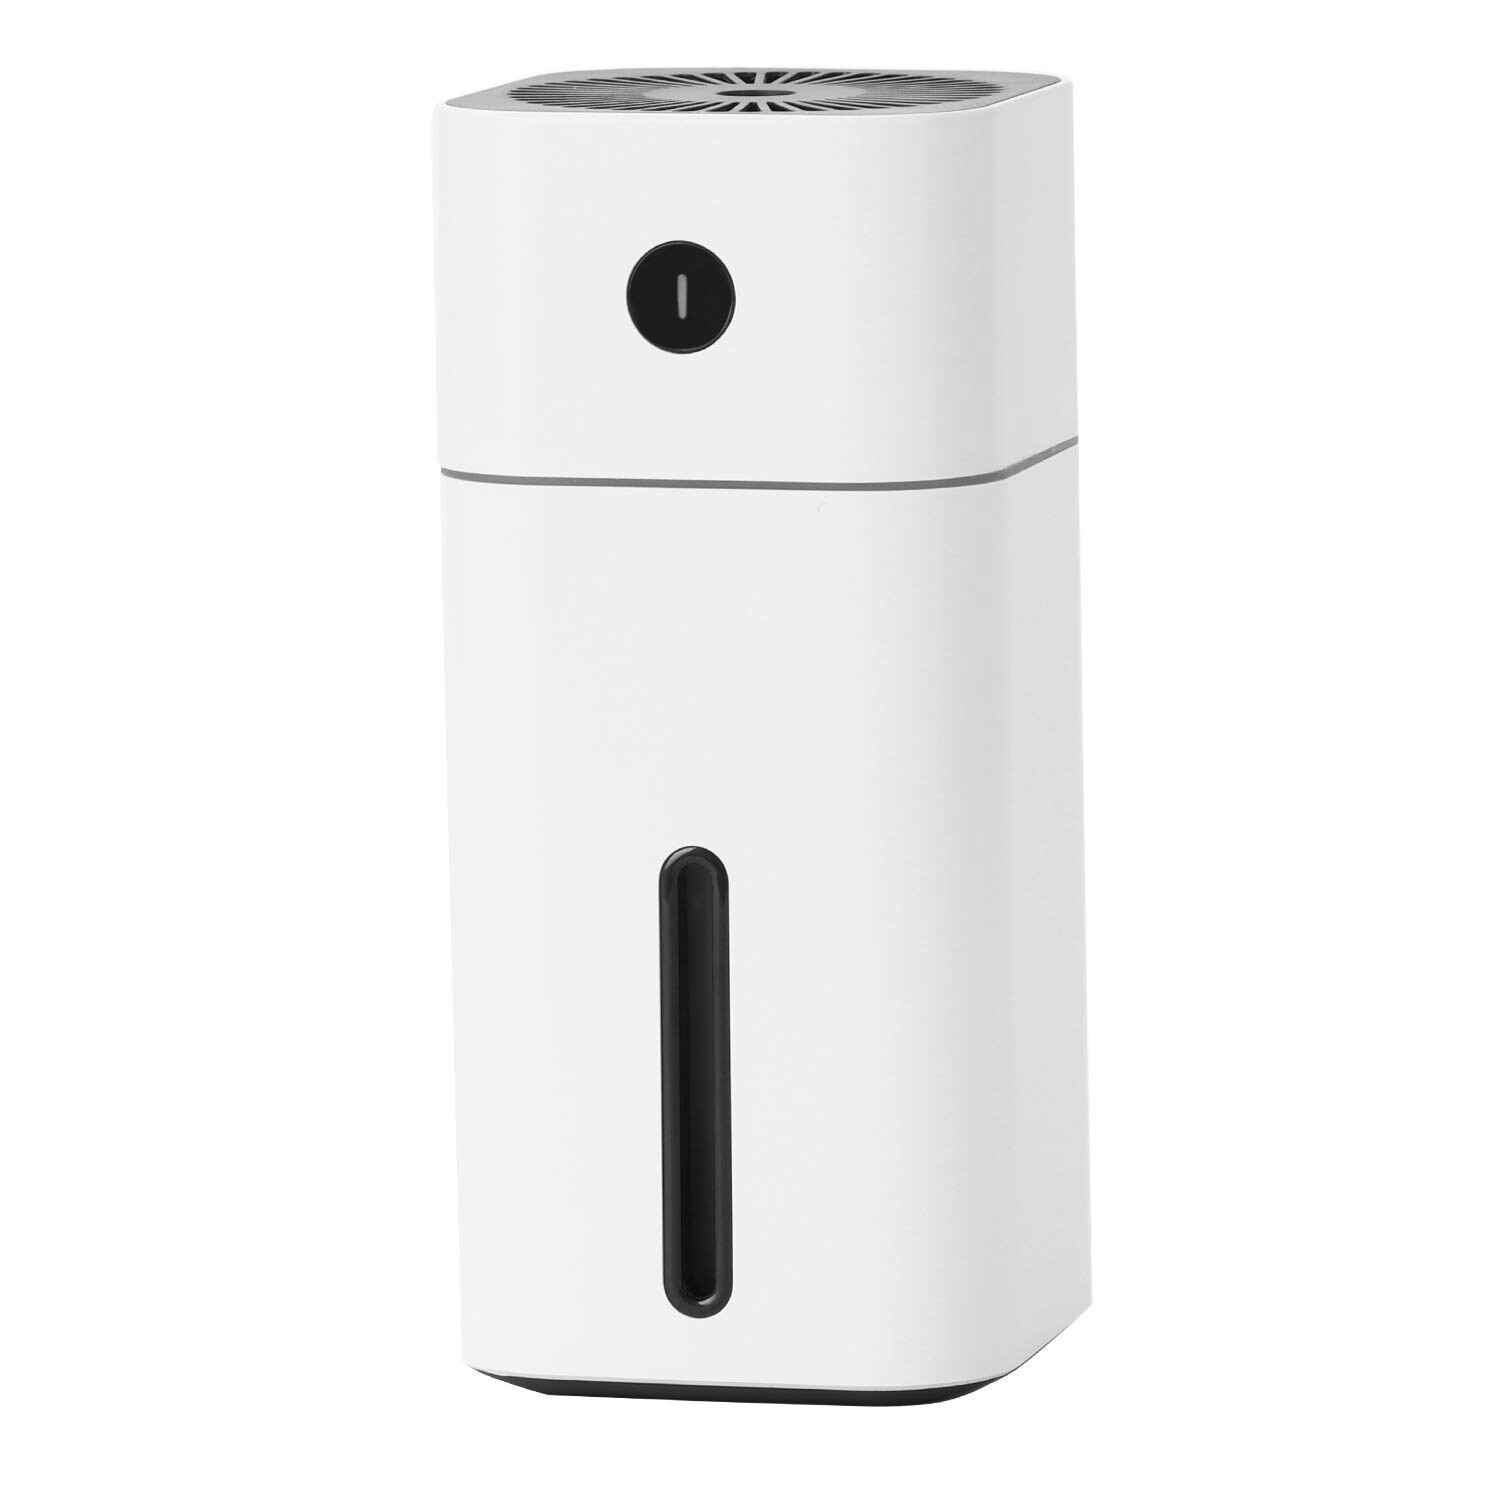 Small Humidifier For Bedroom
 Portable USB Humidifier 7 Colors LED Mini Cool Mist Small